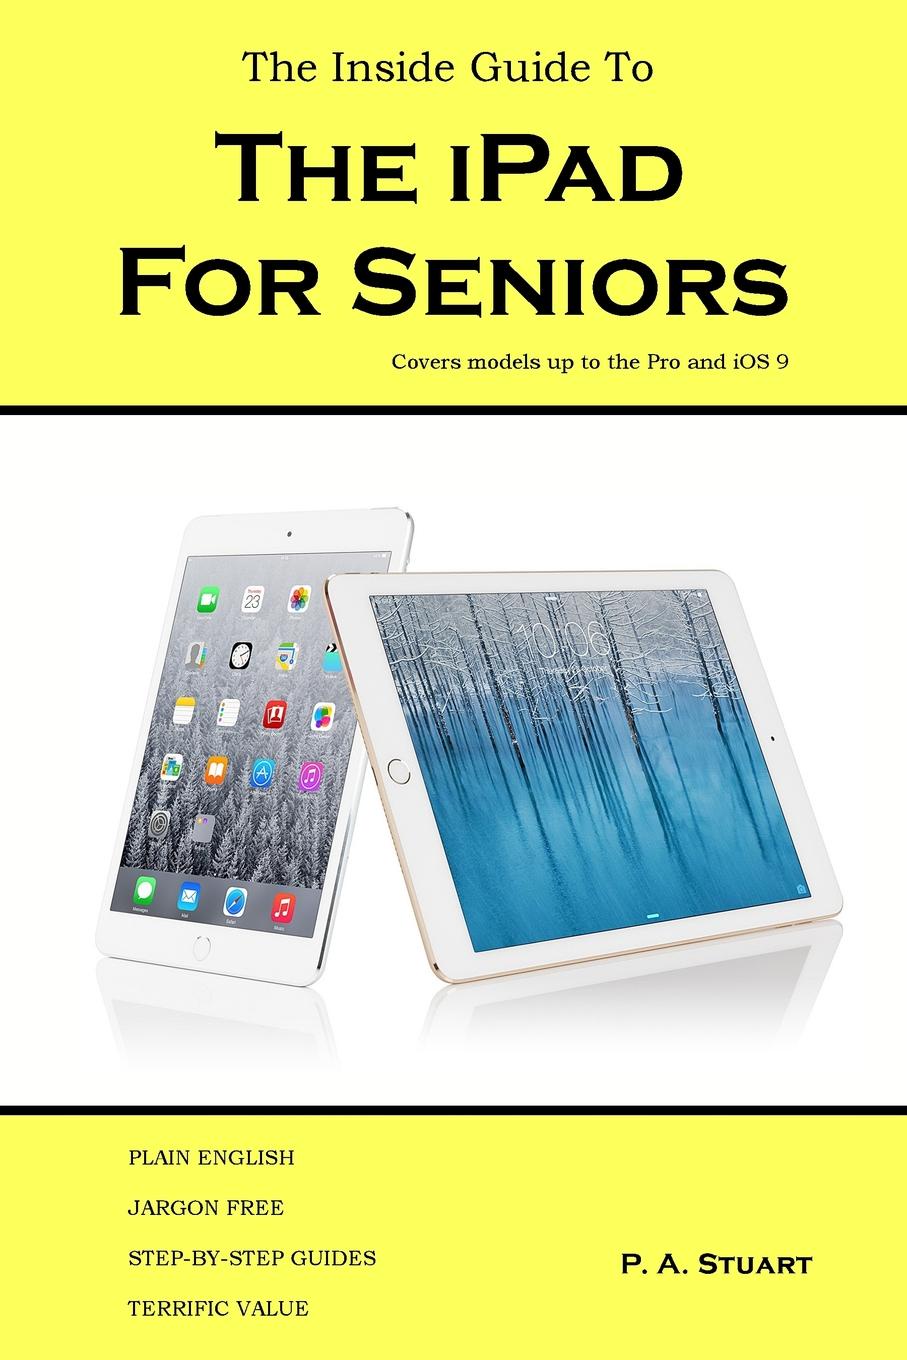 The Inside Guide to the iPad for Seniors. Covers models up to the Pro and iOS 9